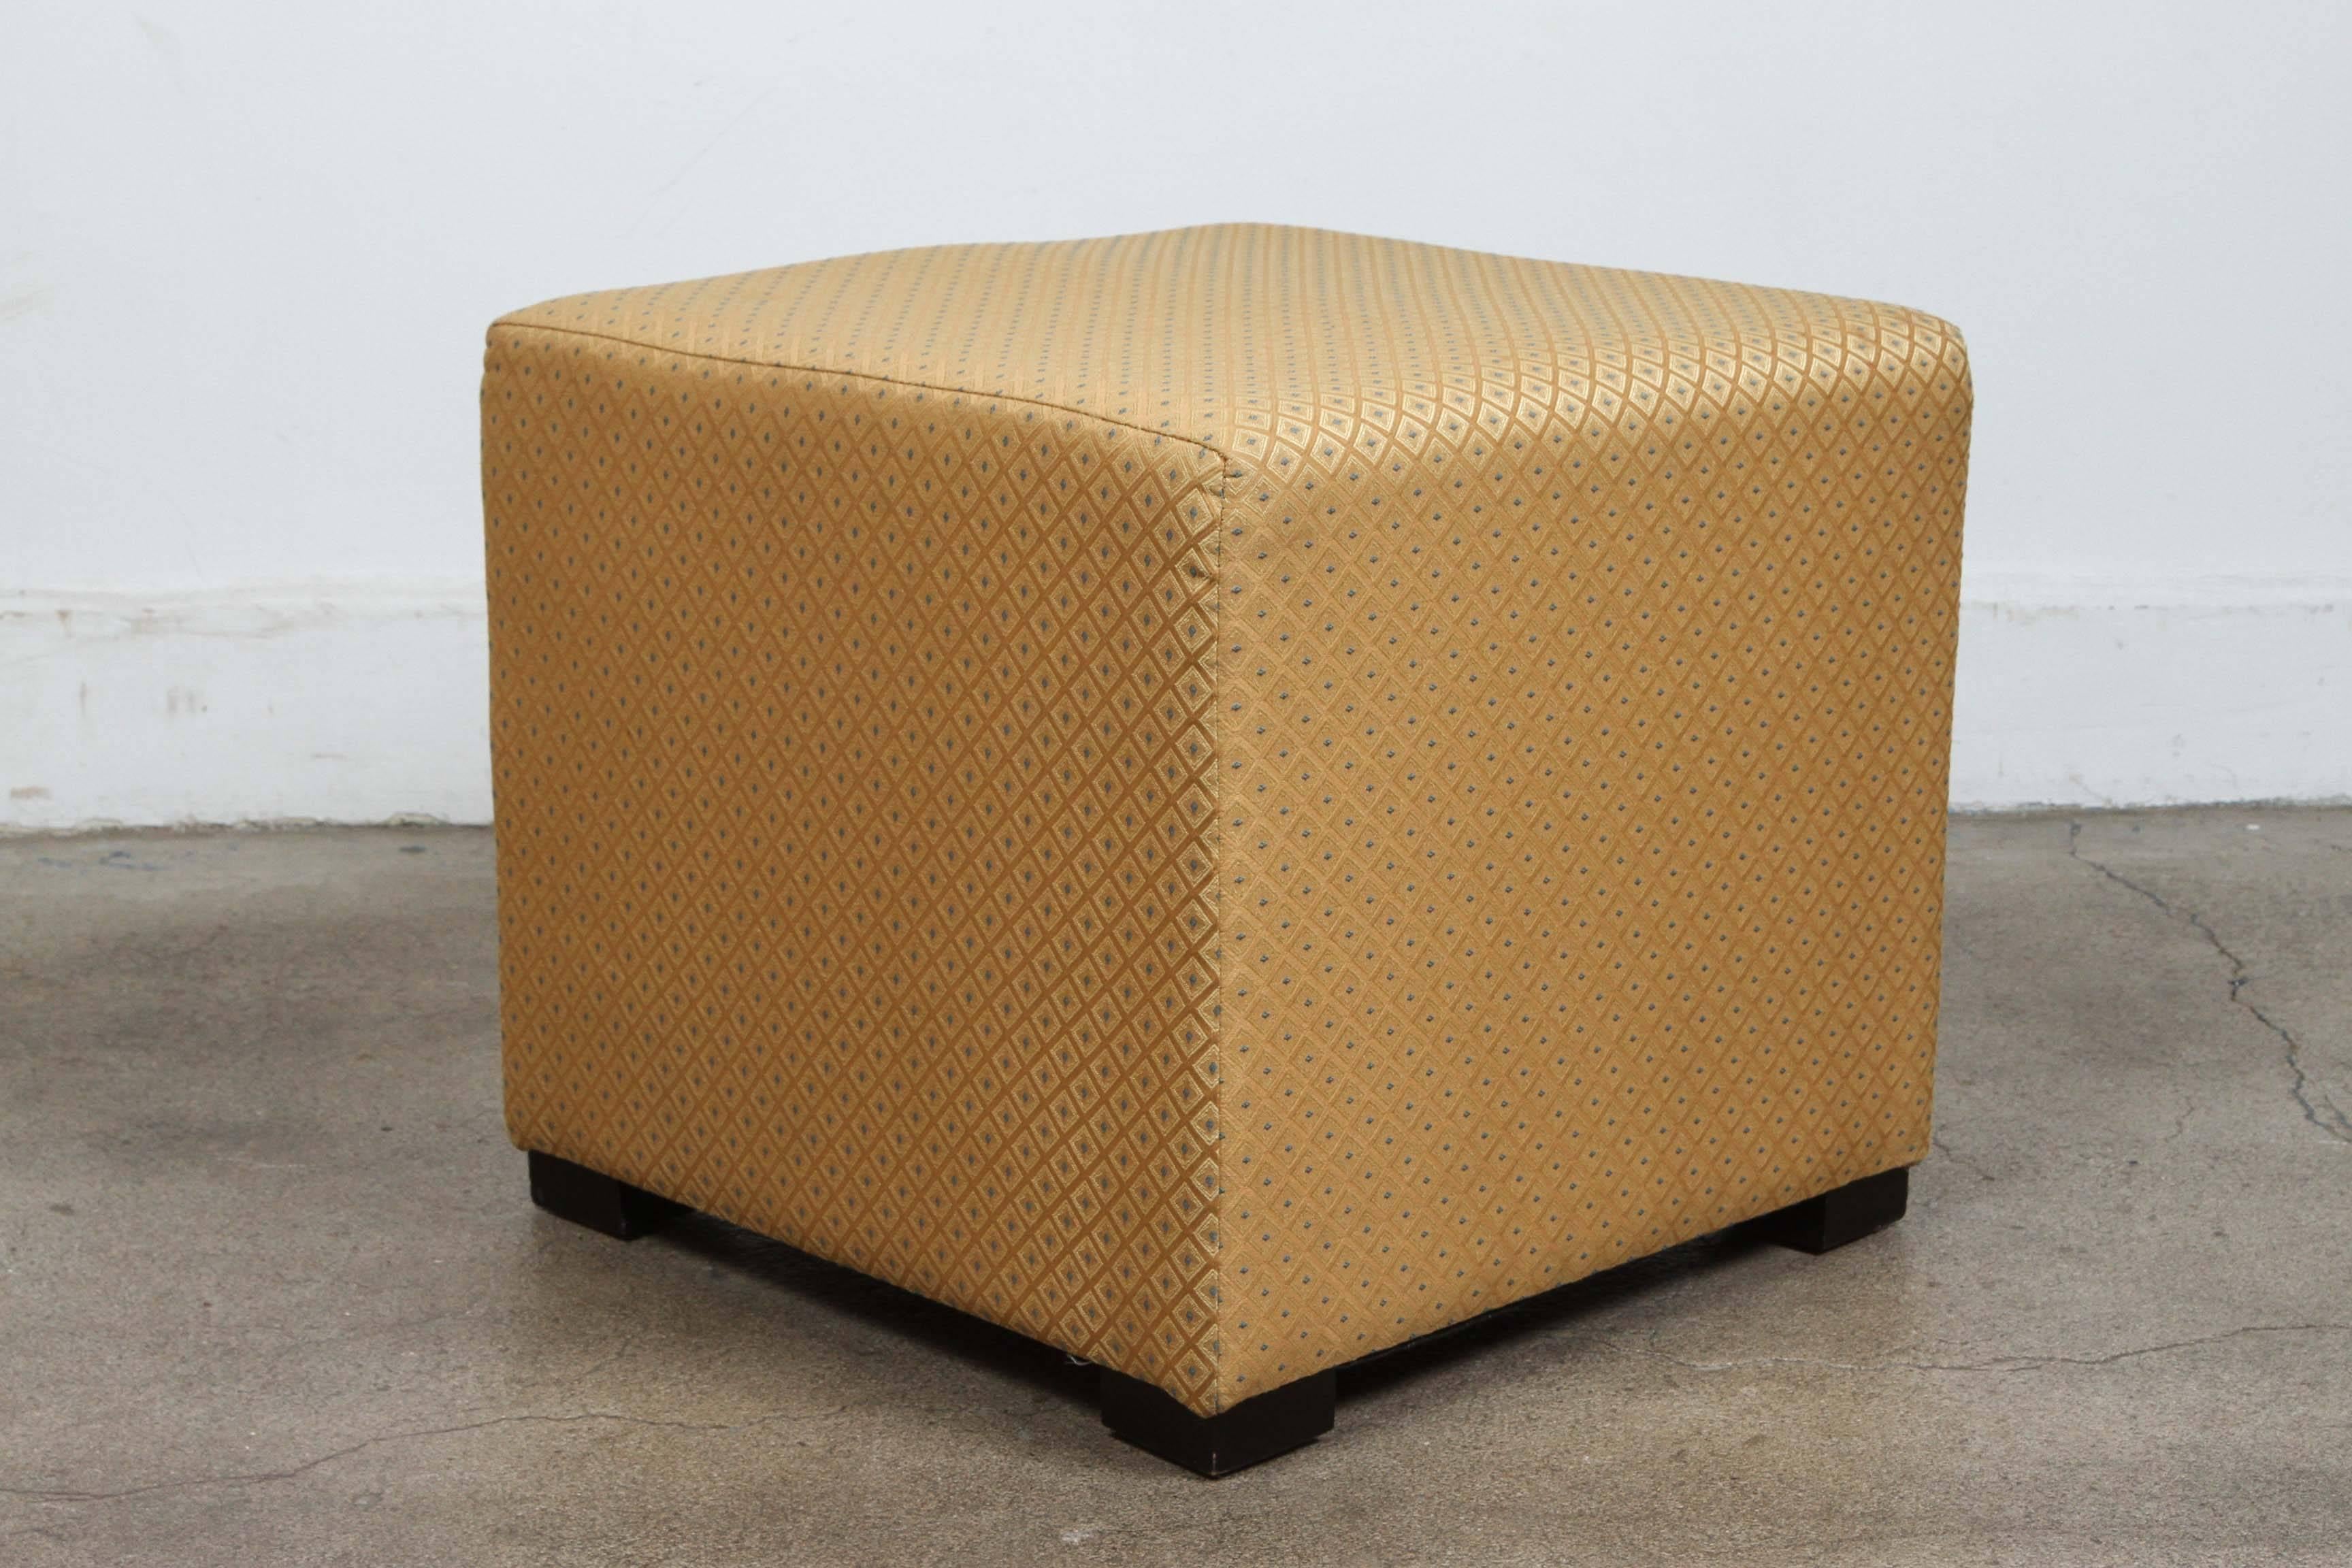 Pair of gold cube upholstery ottomans, Poufs.
Use them as extra seats, ottomans, stools.
Light and easy to move around.
Moroccan hassock, upholstered footstool or ottoman.
Fabric is textured Moroccan gold with light turquoise blue.
Pair of modern